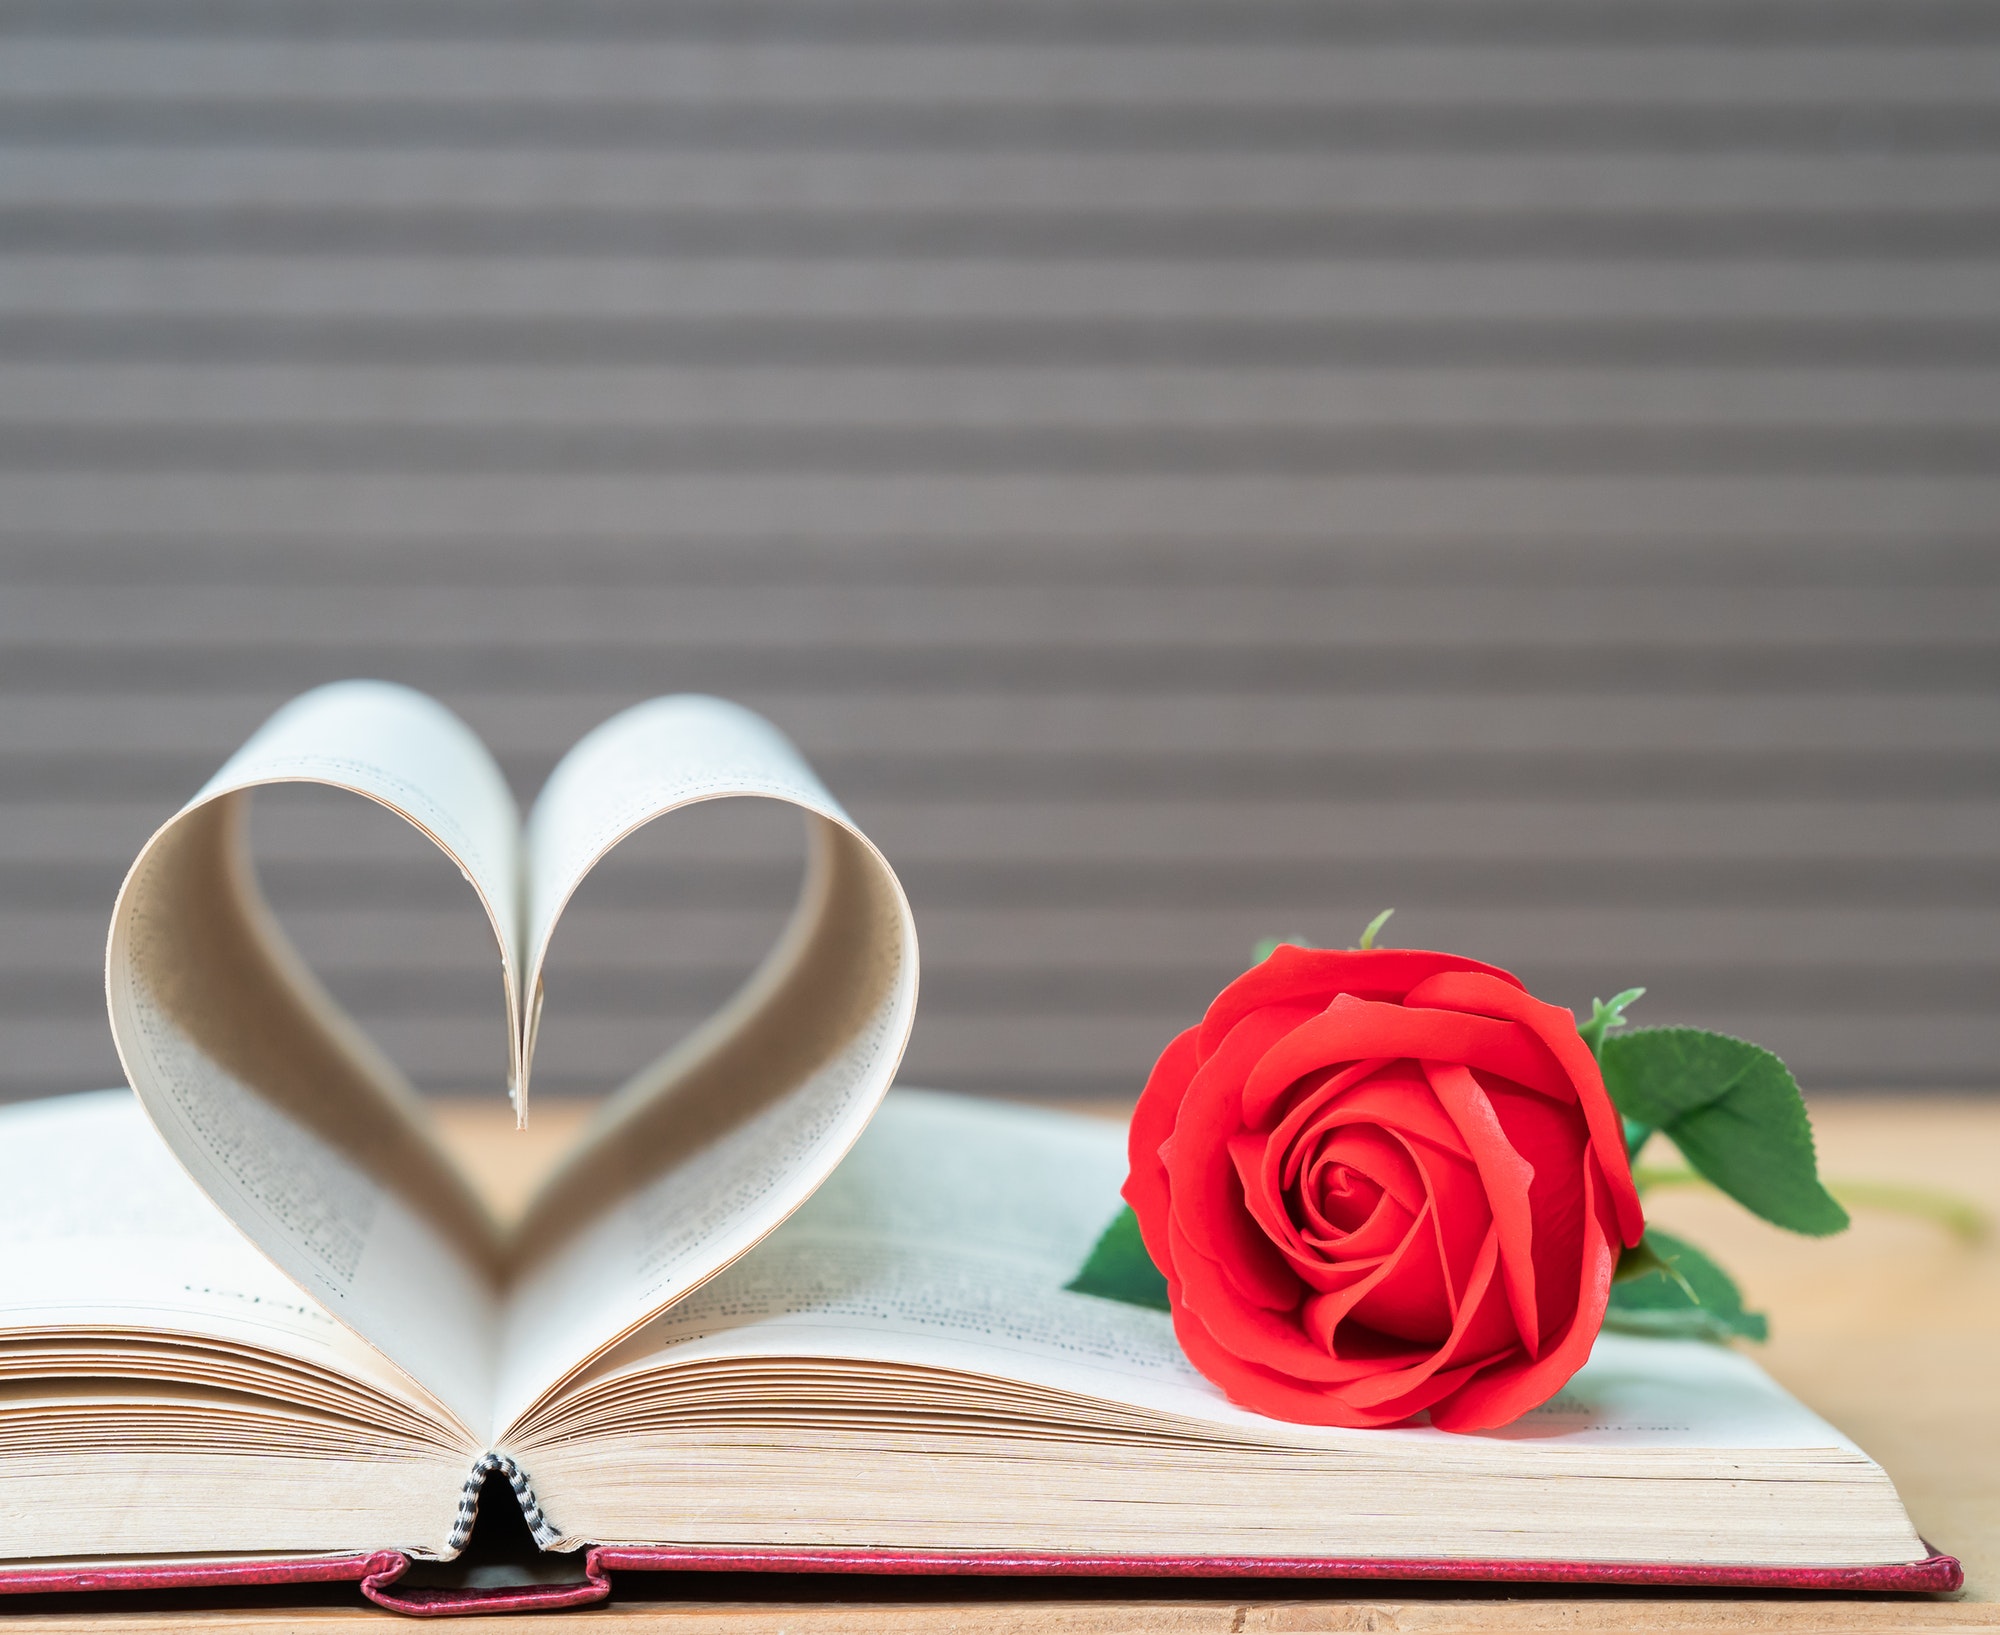 Pages of book curved heart shape and red rose